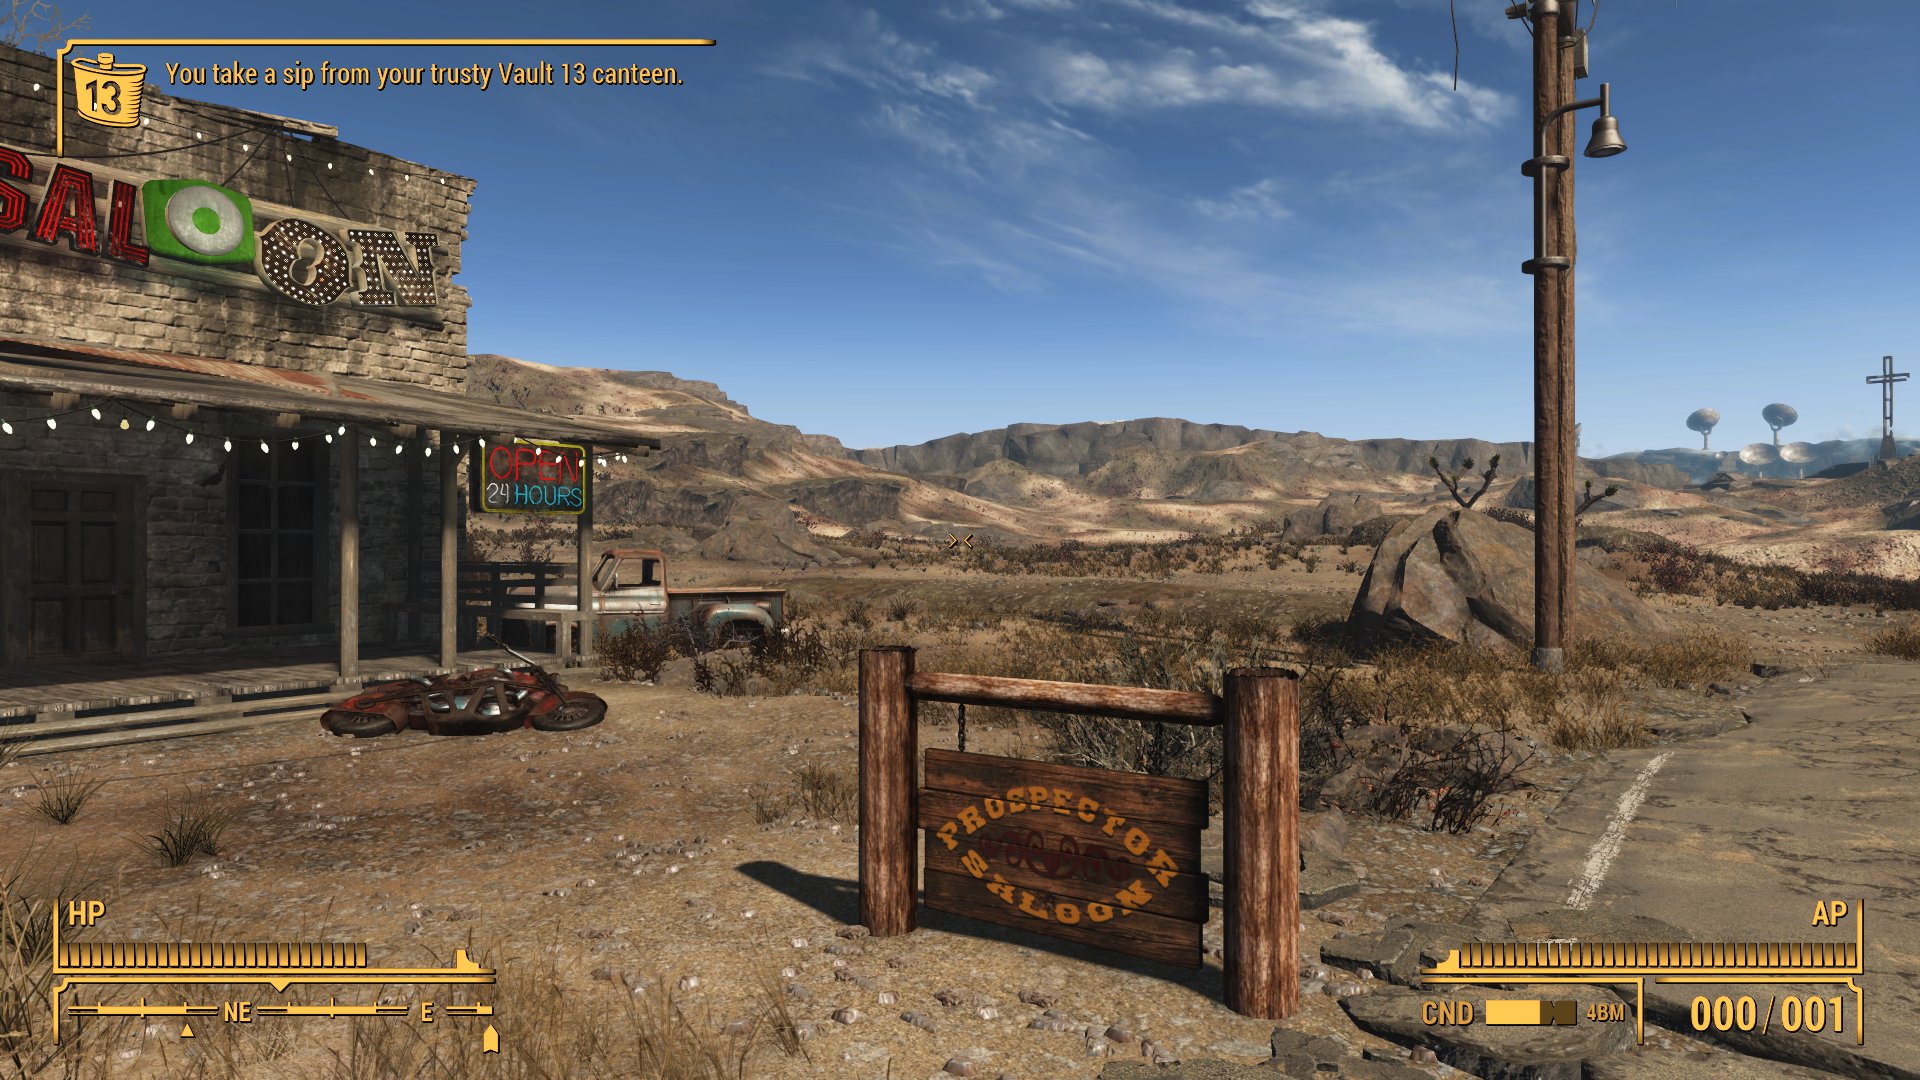 Fallout 4 New Vegas Remake Gets New Footage 2 Years After Previous Trailer